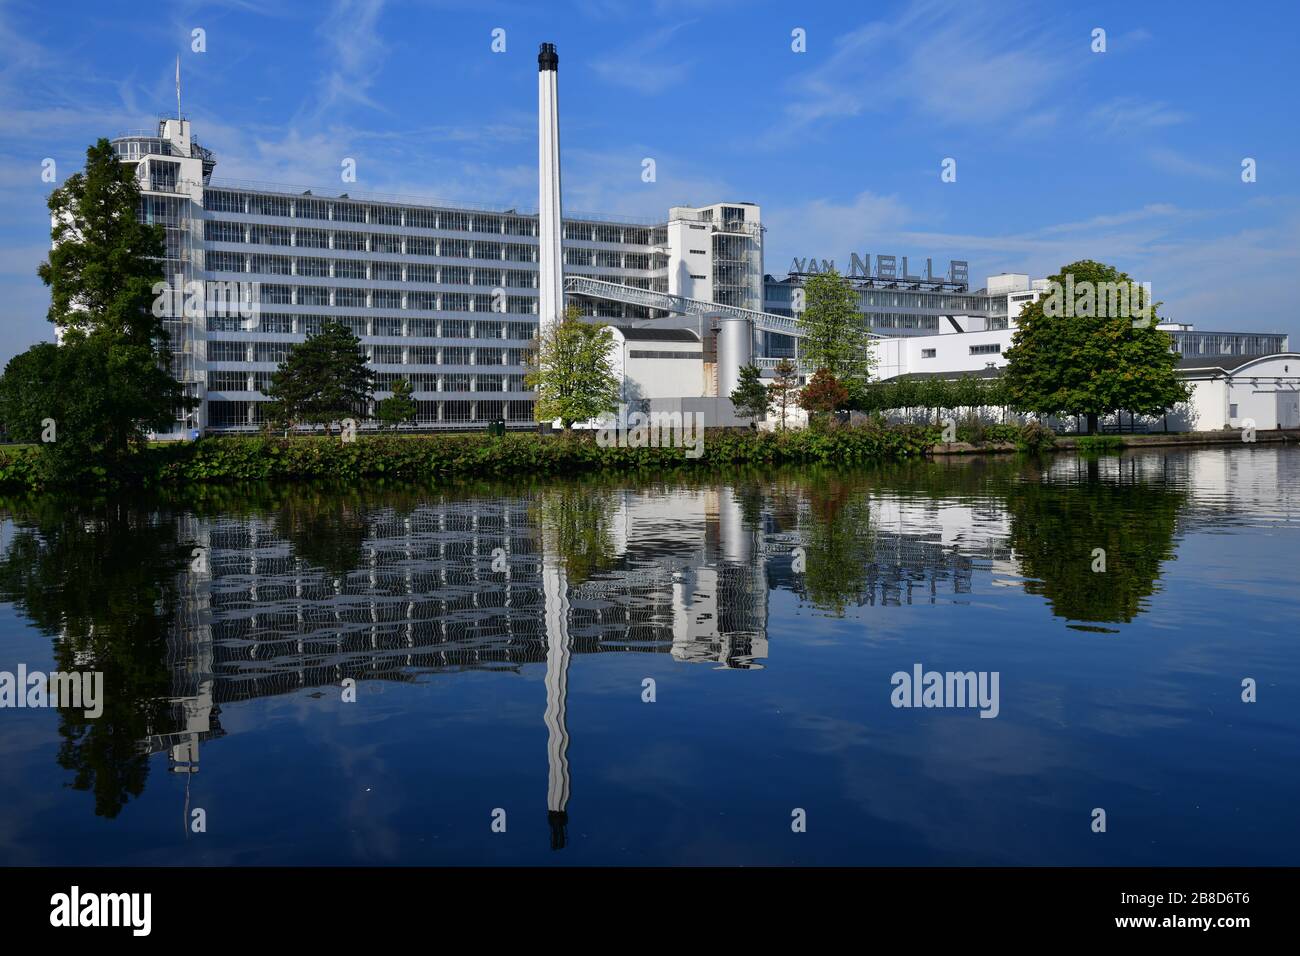 Photo taken from the other side of the Schie river of the Van Nelle Factory, a Unesco World Heritage site, reflecting in the water Stock Photo